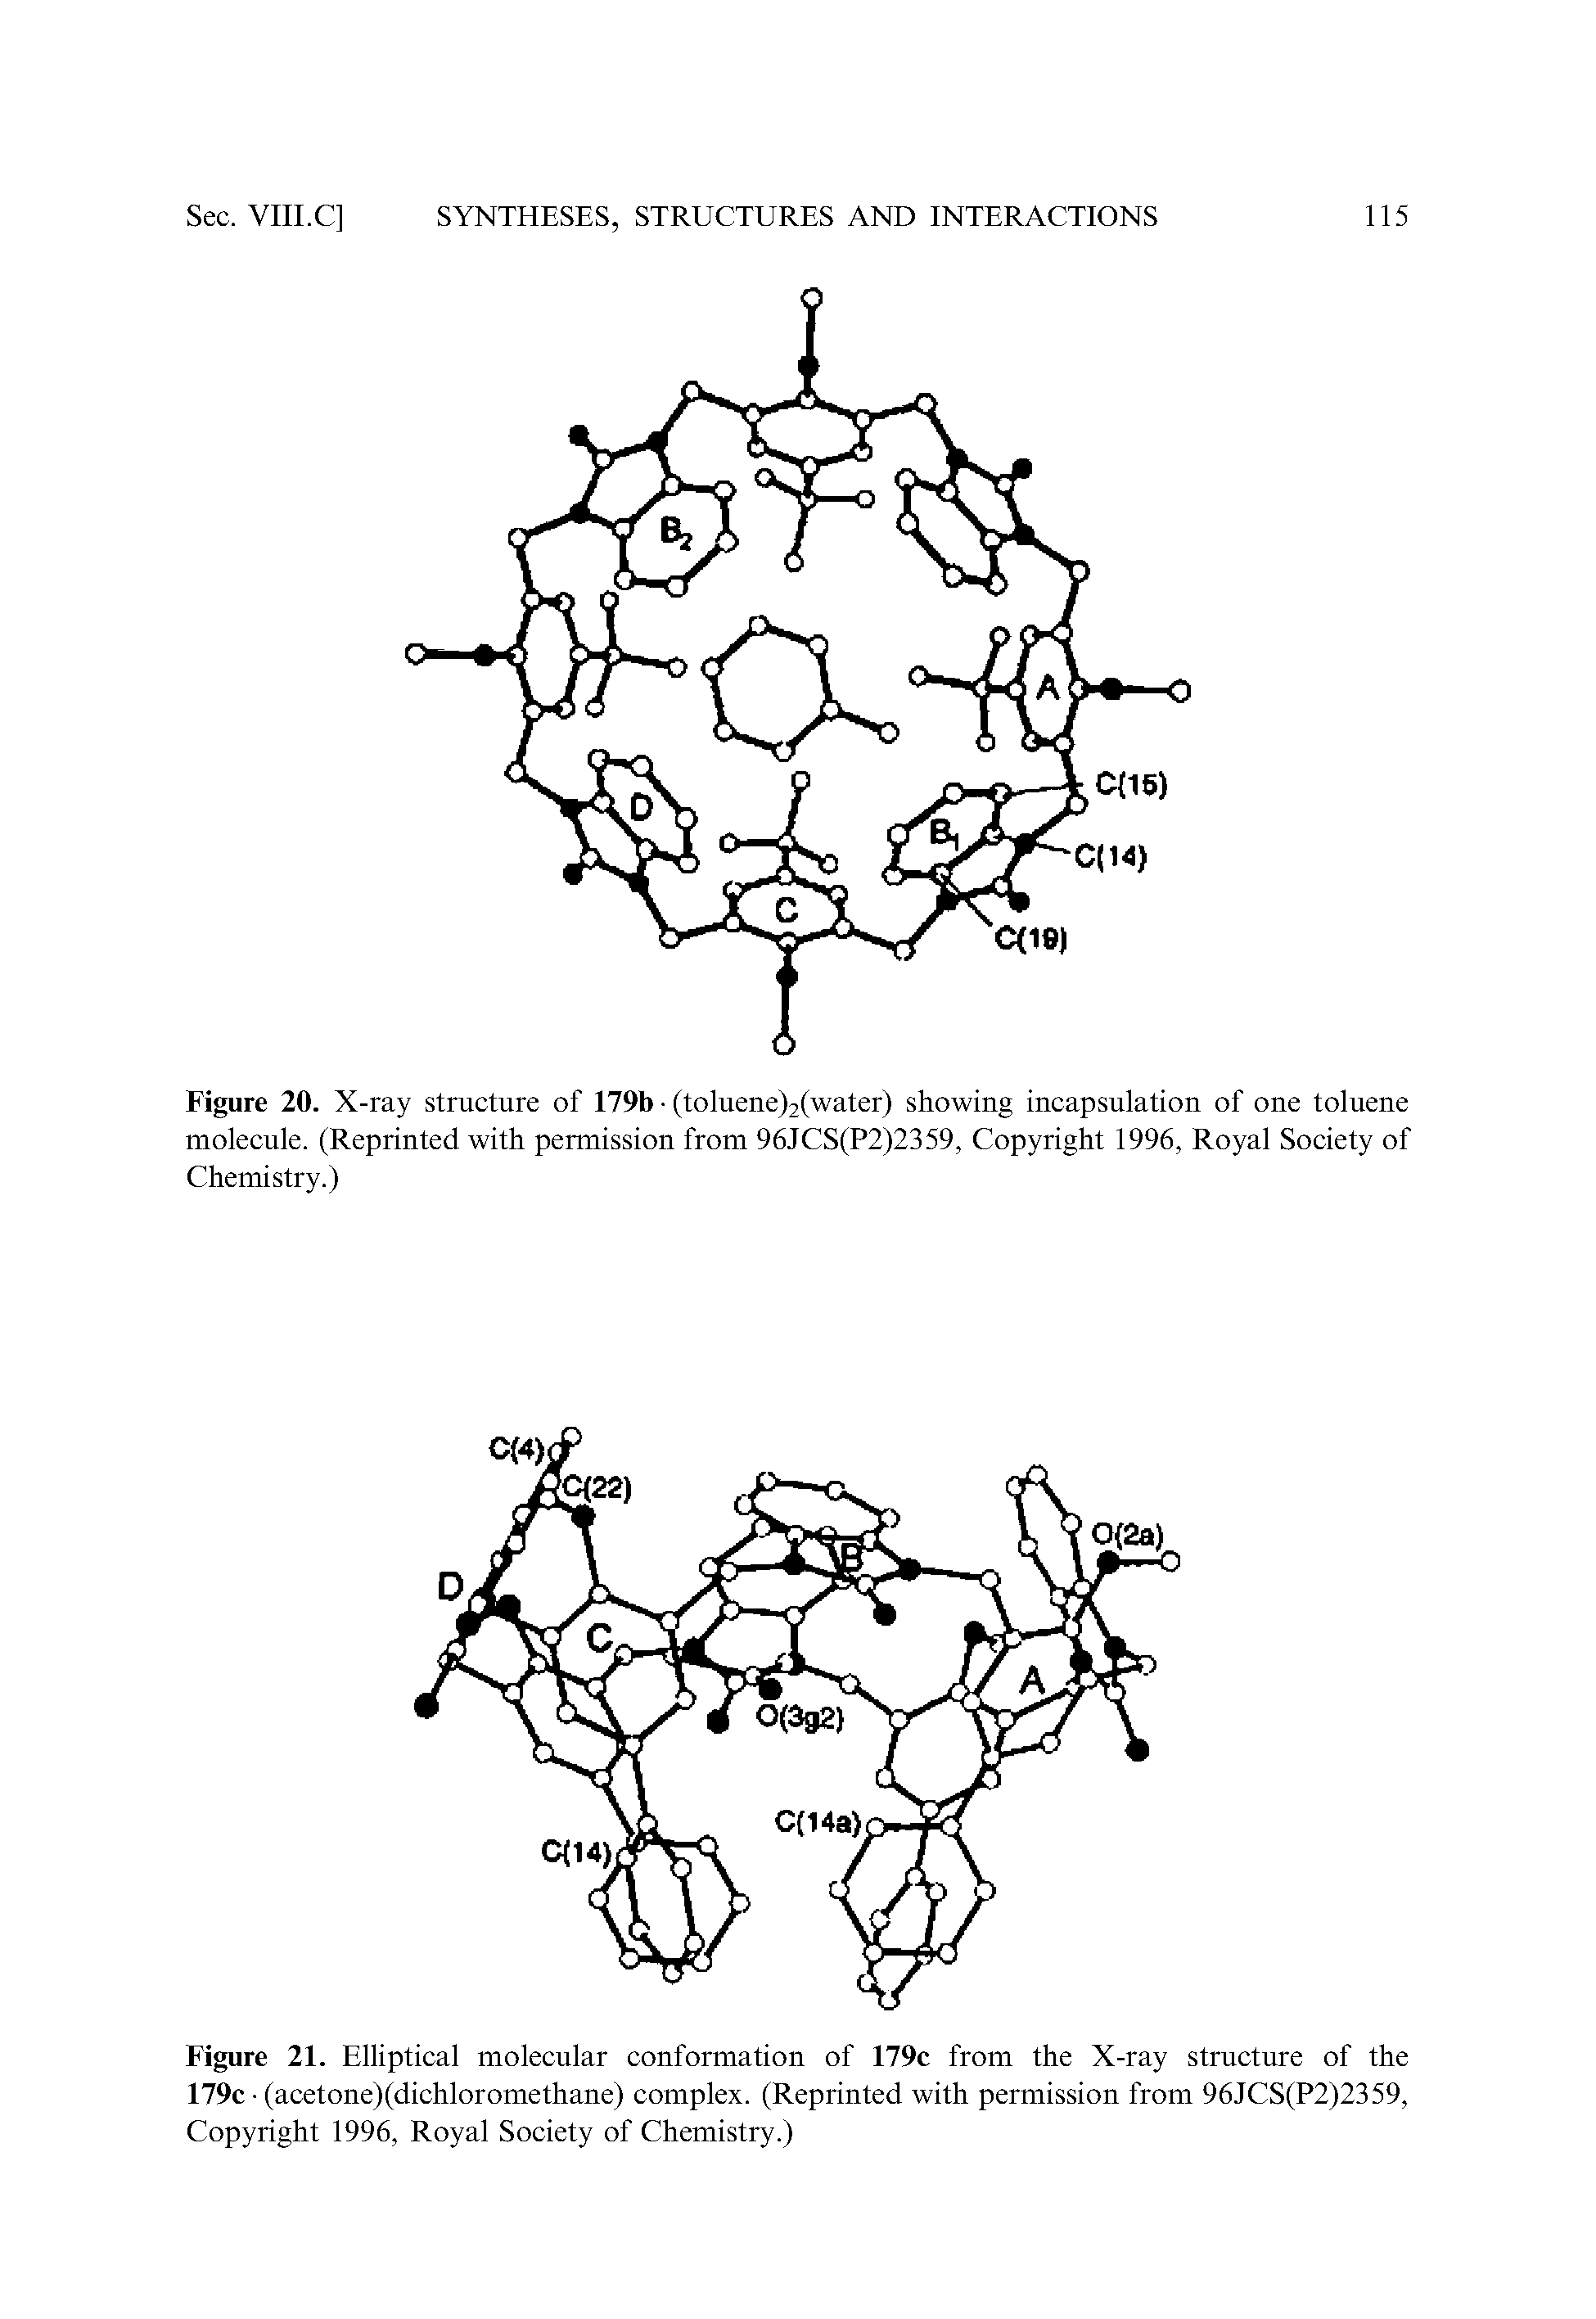 Figure 21. Elliptical molecular conformation of 179c from the X-ray structure of the 179c (acetone)(dichloromethane) complex. (Reprinted with permission from 96JCS(P2)2359, Copyright 1996, Royal Society of Chemistry.)...